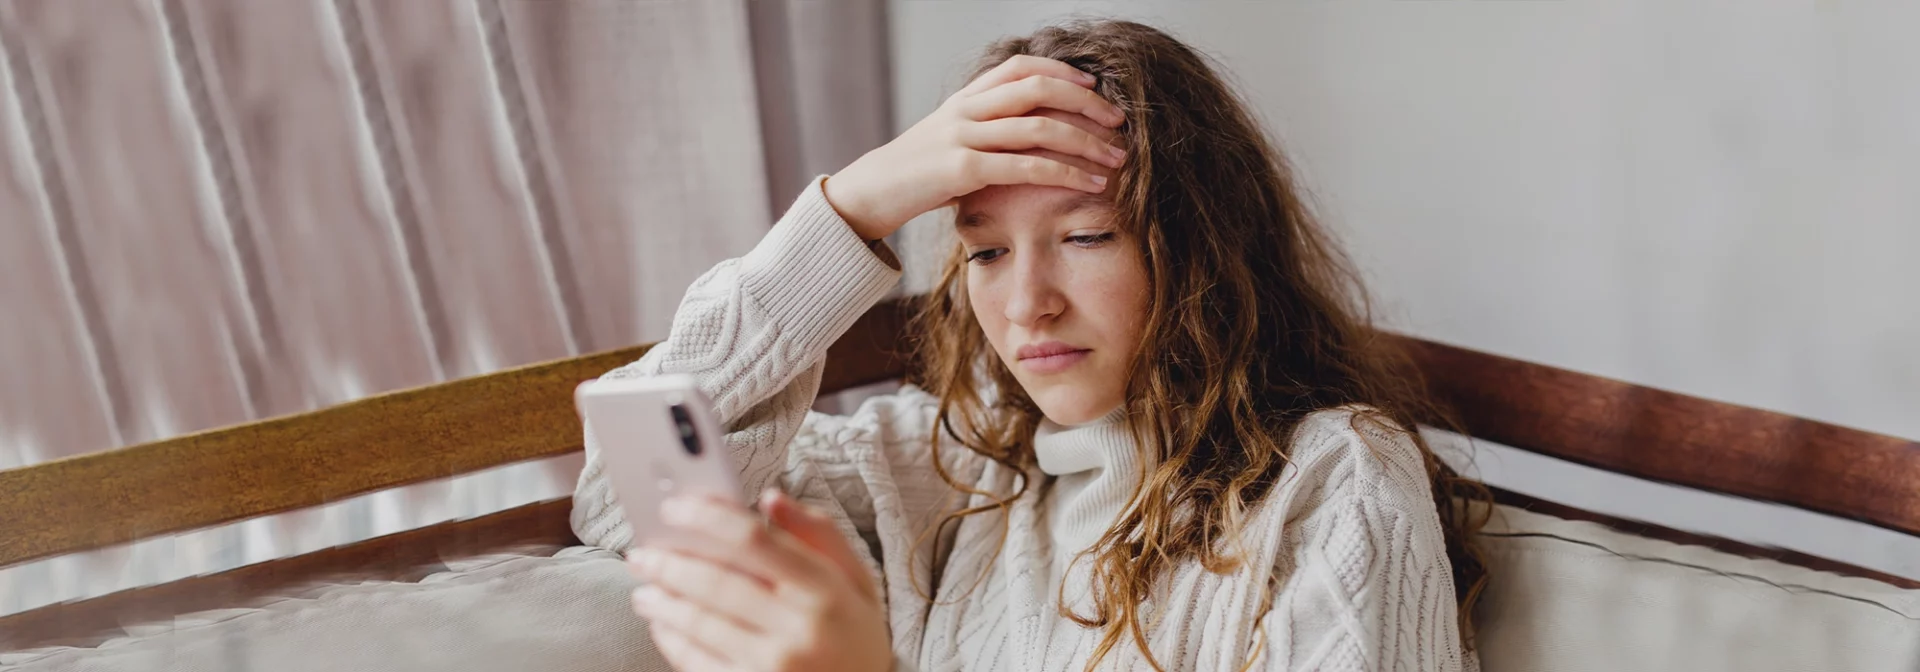 stressed out teen in bedroom looking down at phone